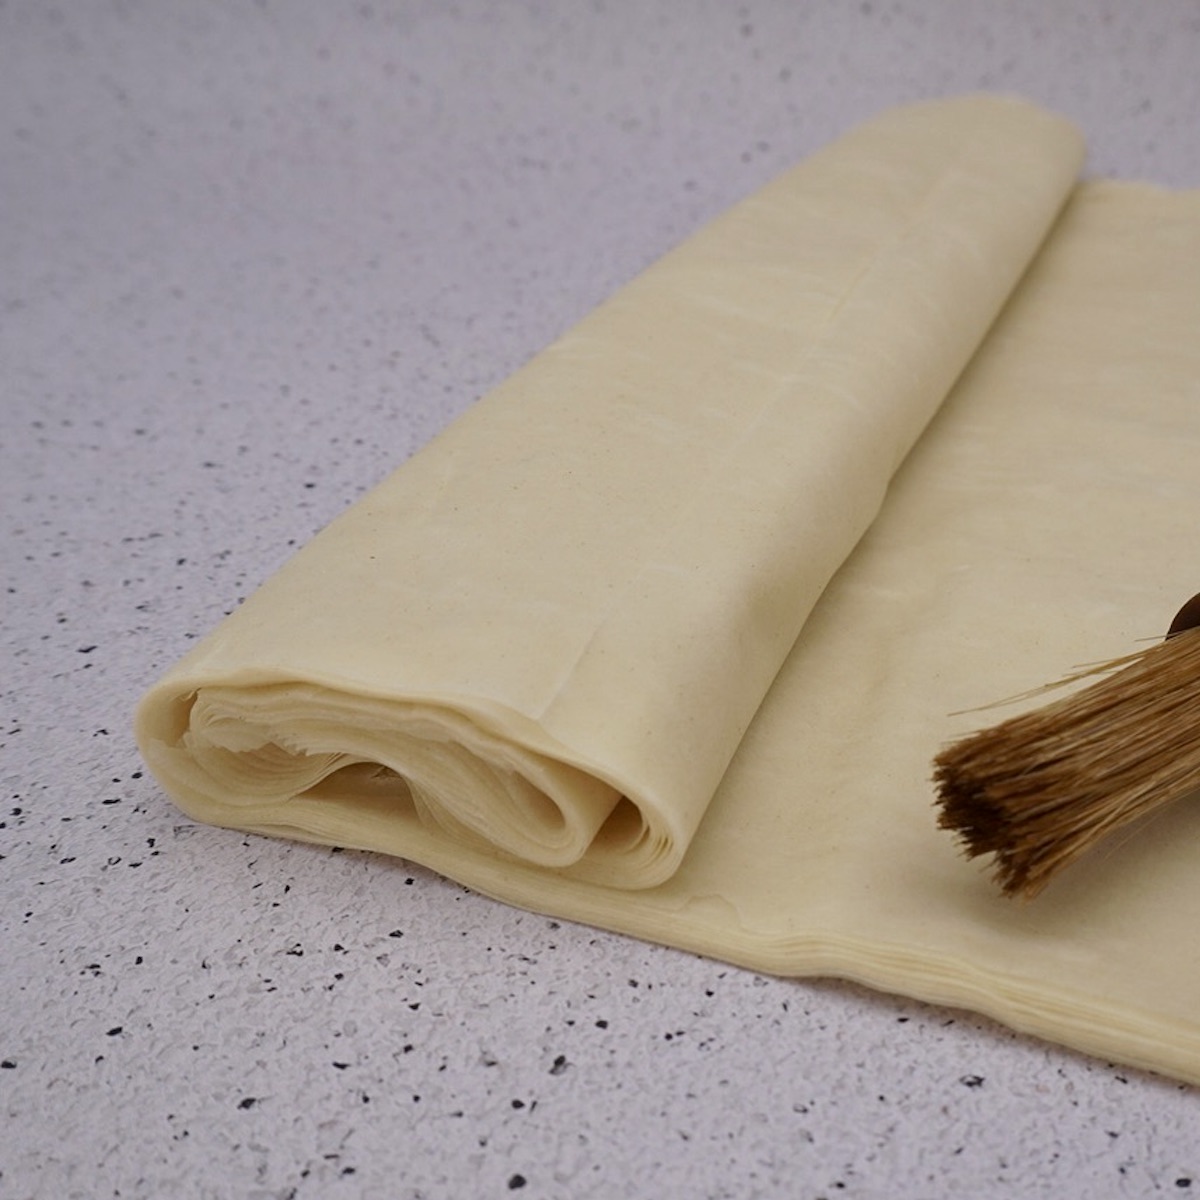 A roll of several sheets of filo pastry.